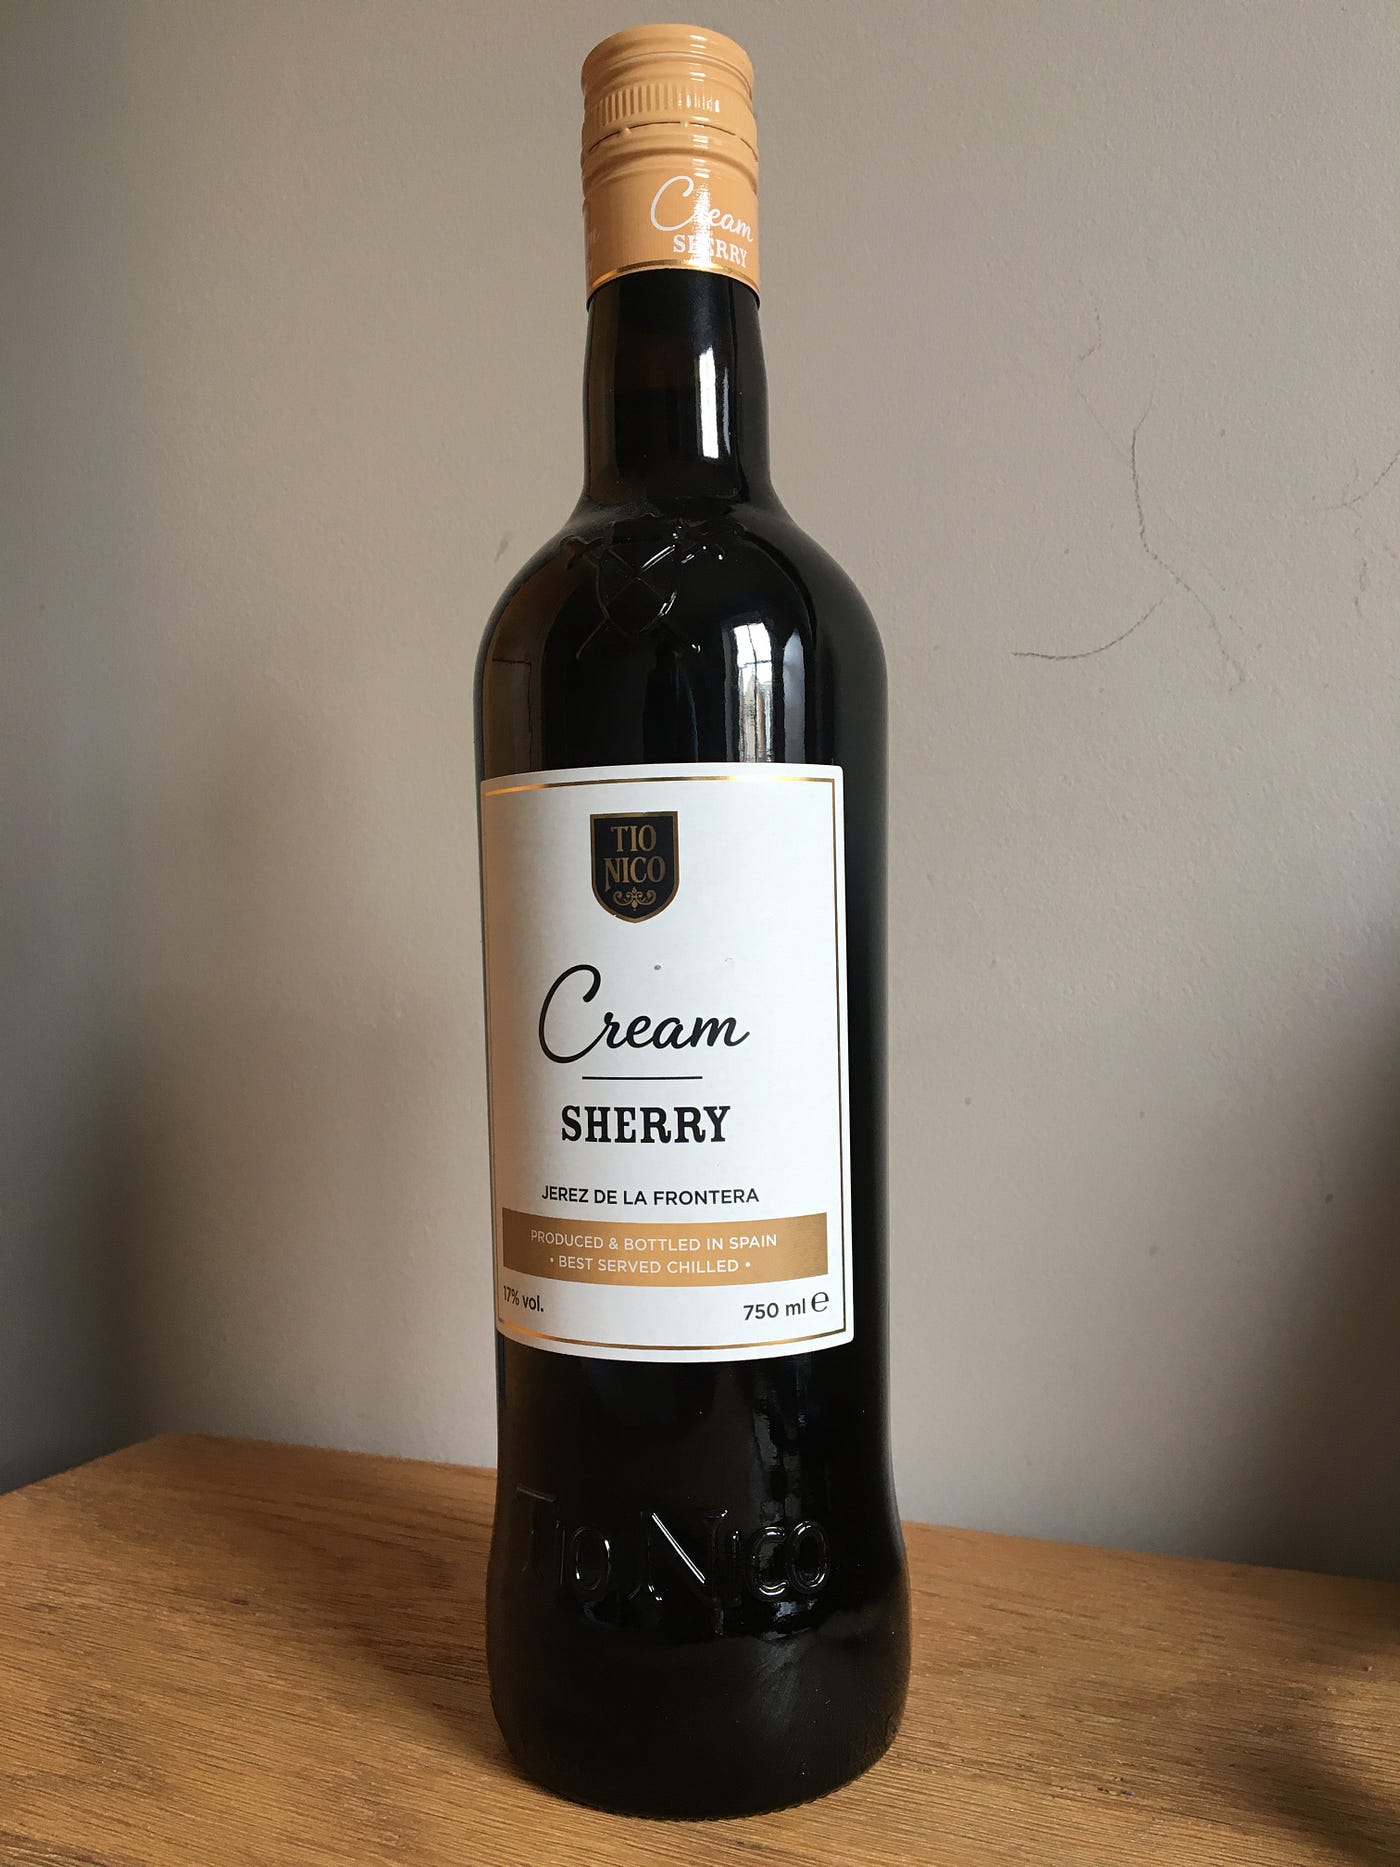 Lidl\'s Tio sherry by Medium entry-level Lewis Tom Lidl | | An Nico from cream Cream Sherry